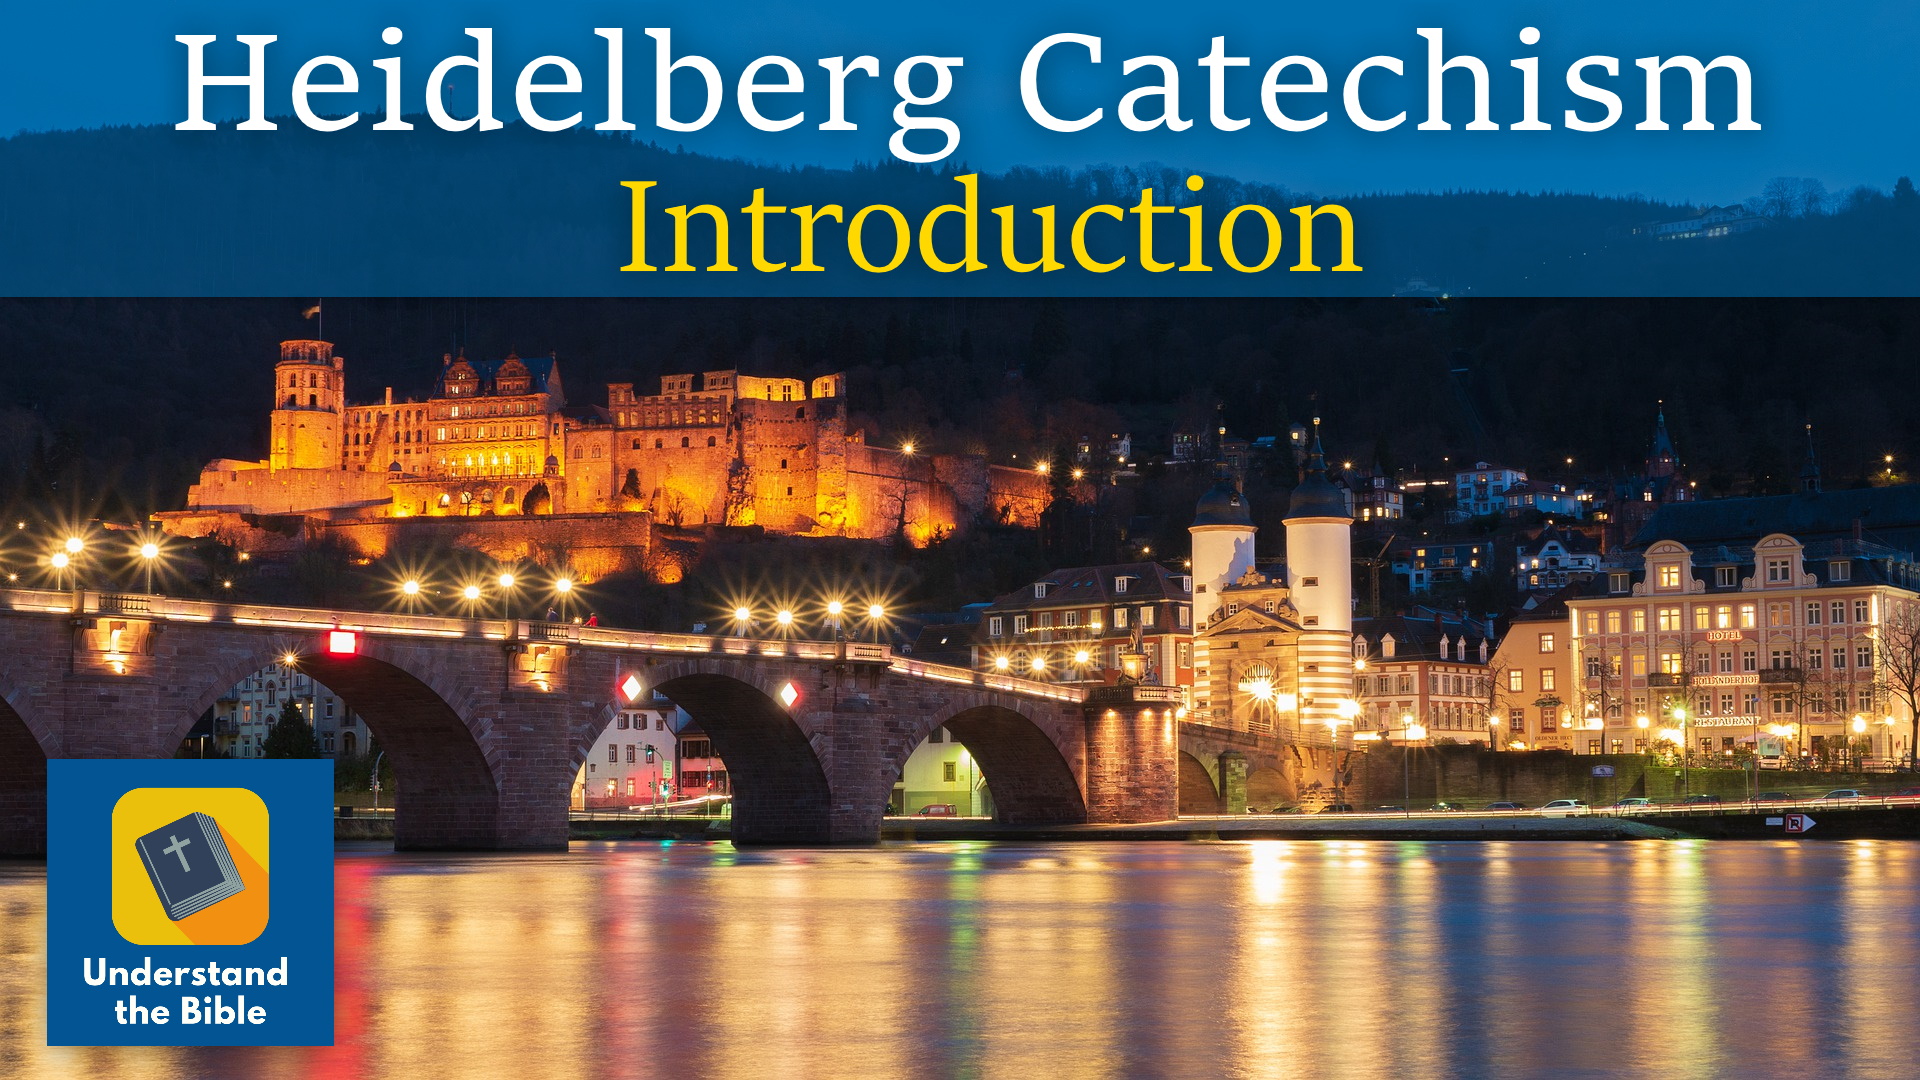 Heidelberg Catechism: Introduction